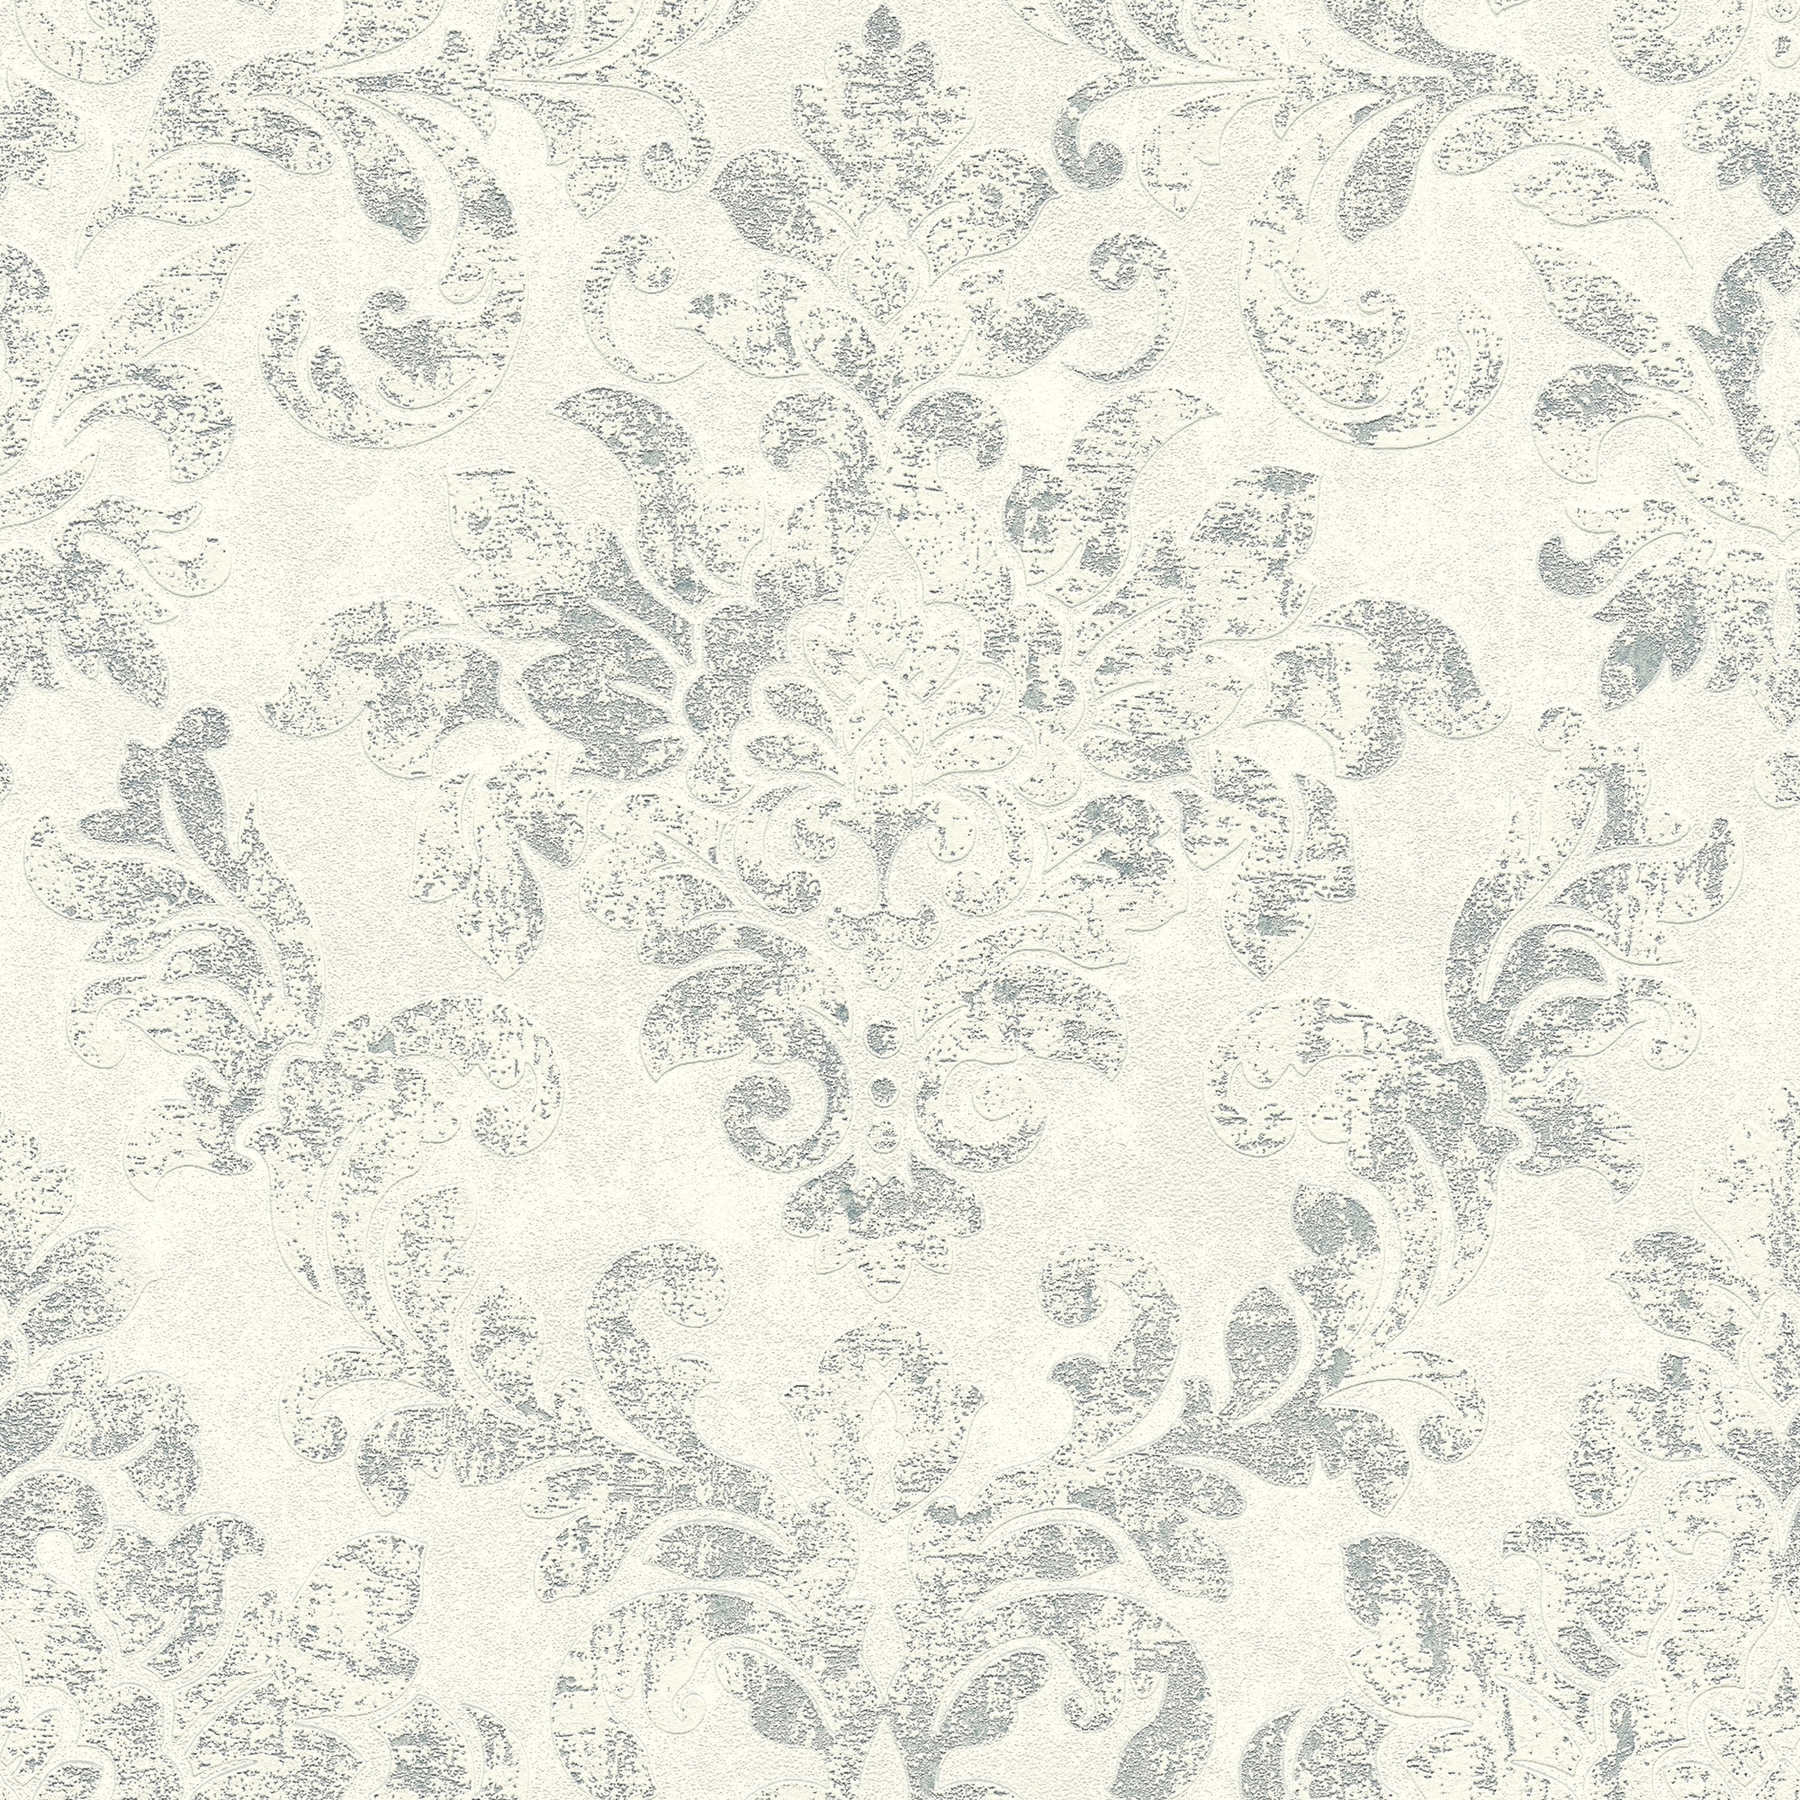 Baroque wallpaper with ornaments in vintage style - grey, silver, white
